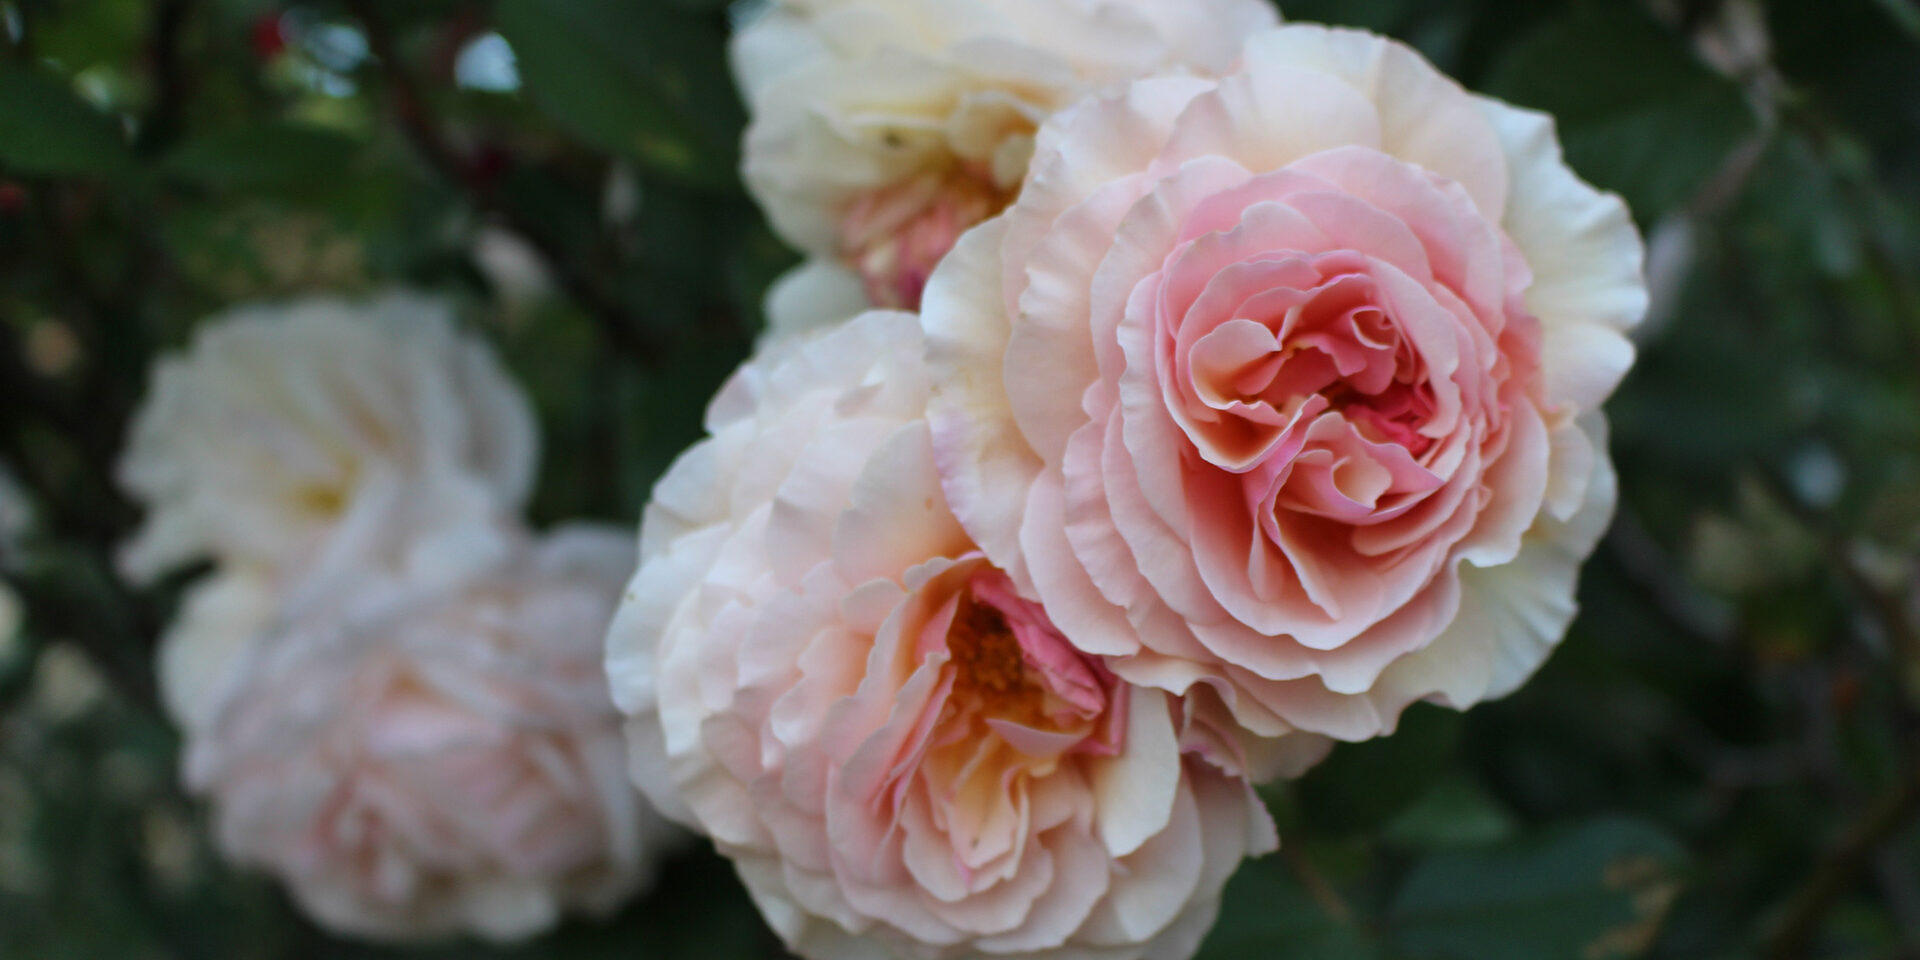 pink-and-white-rose-flowers-during-daytime